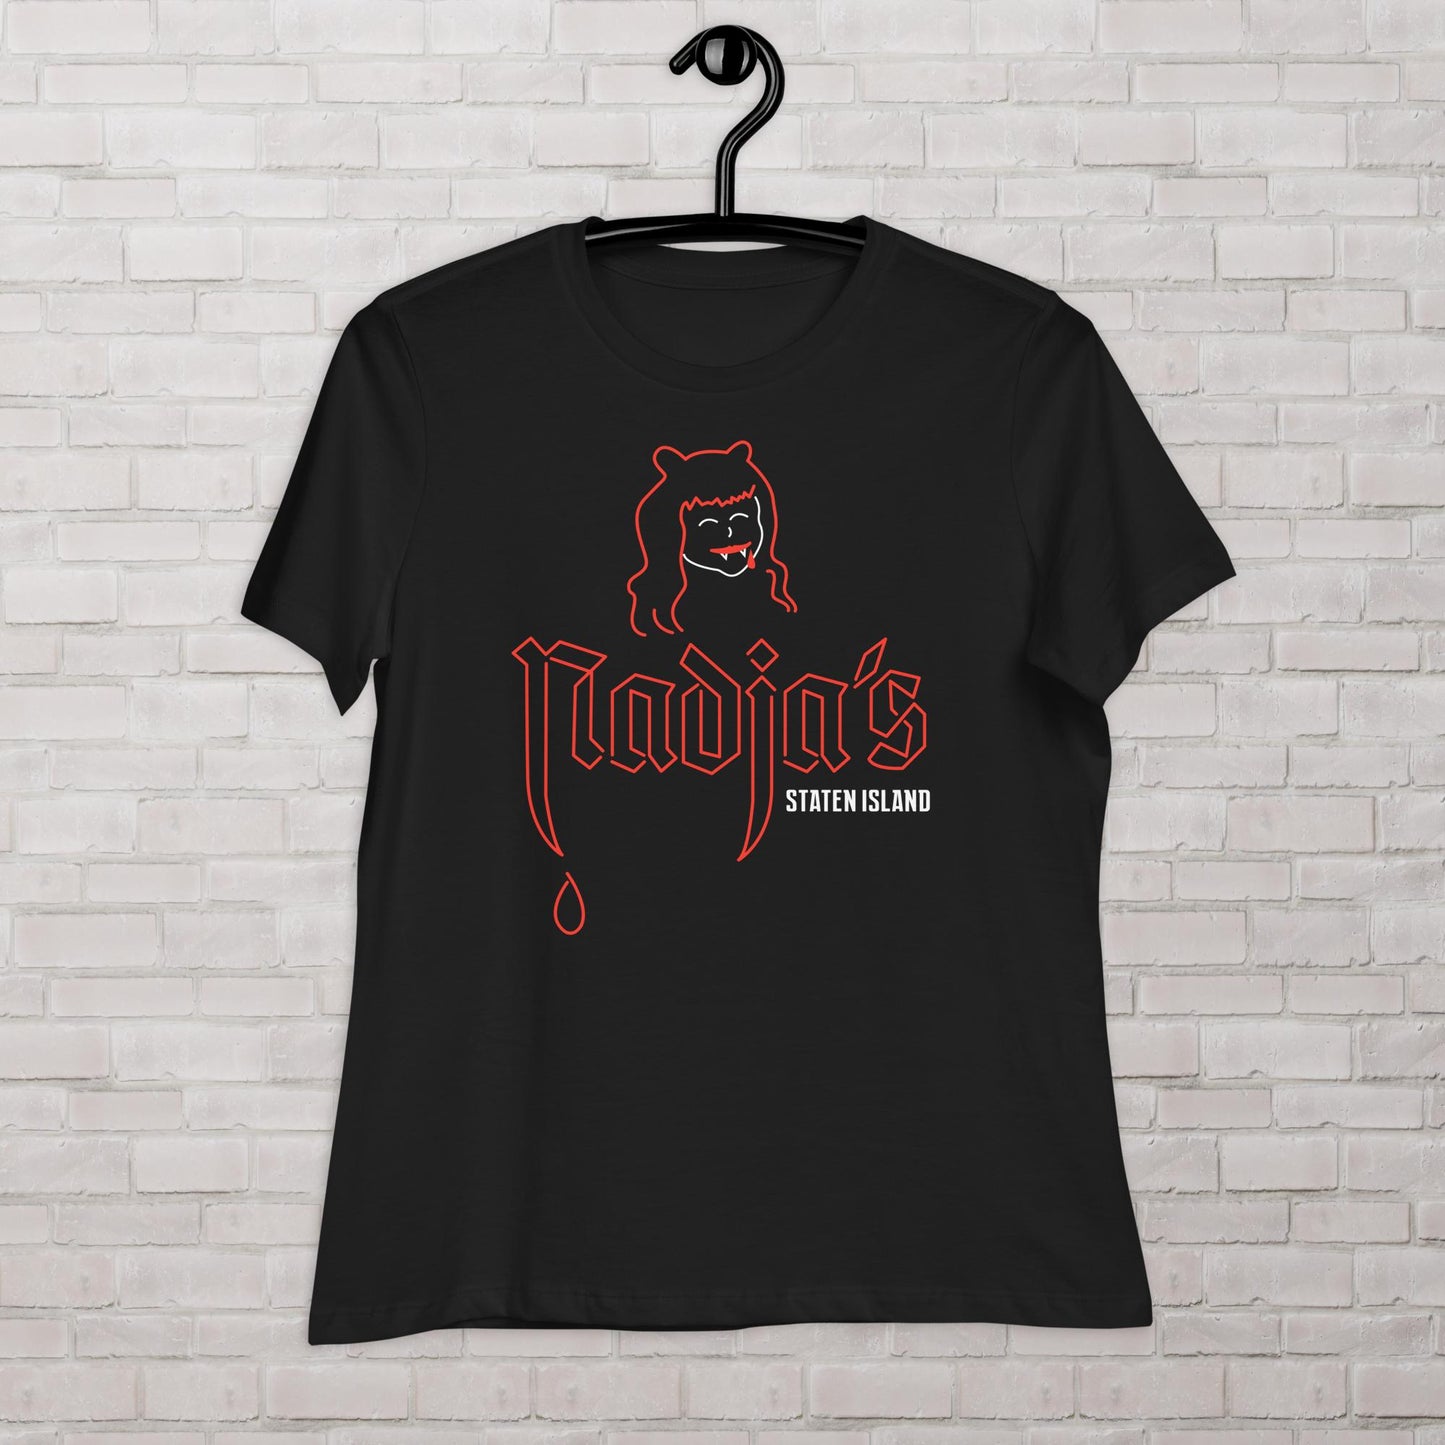 Nadja's Vampire Night Club WWDITS What We Do in the Shadows Femme Fit Tee Plus Size Available